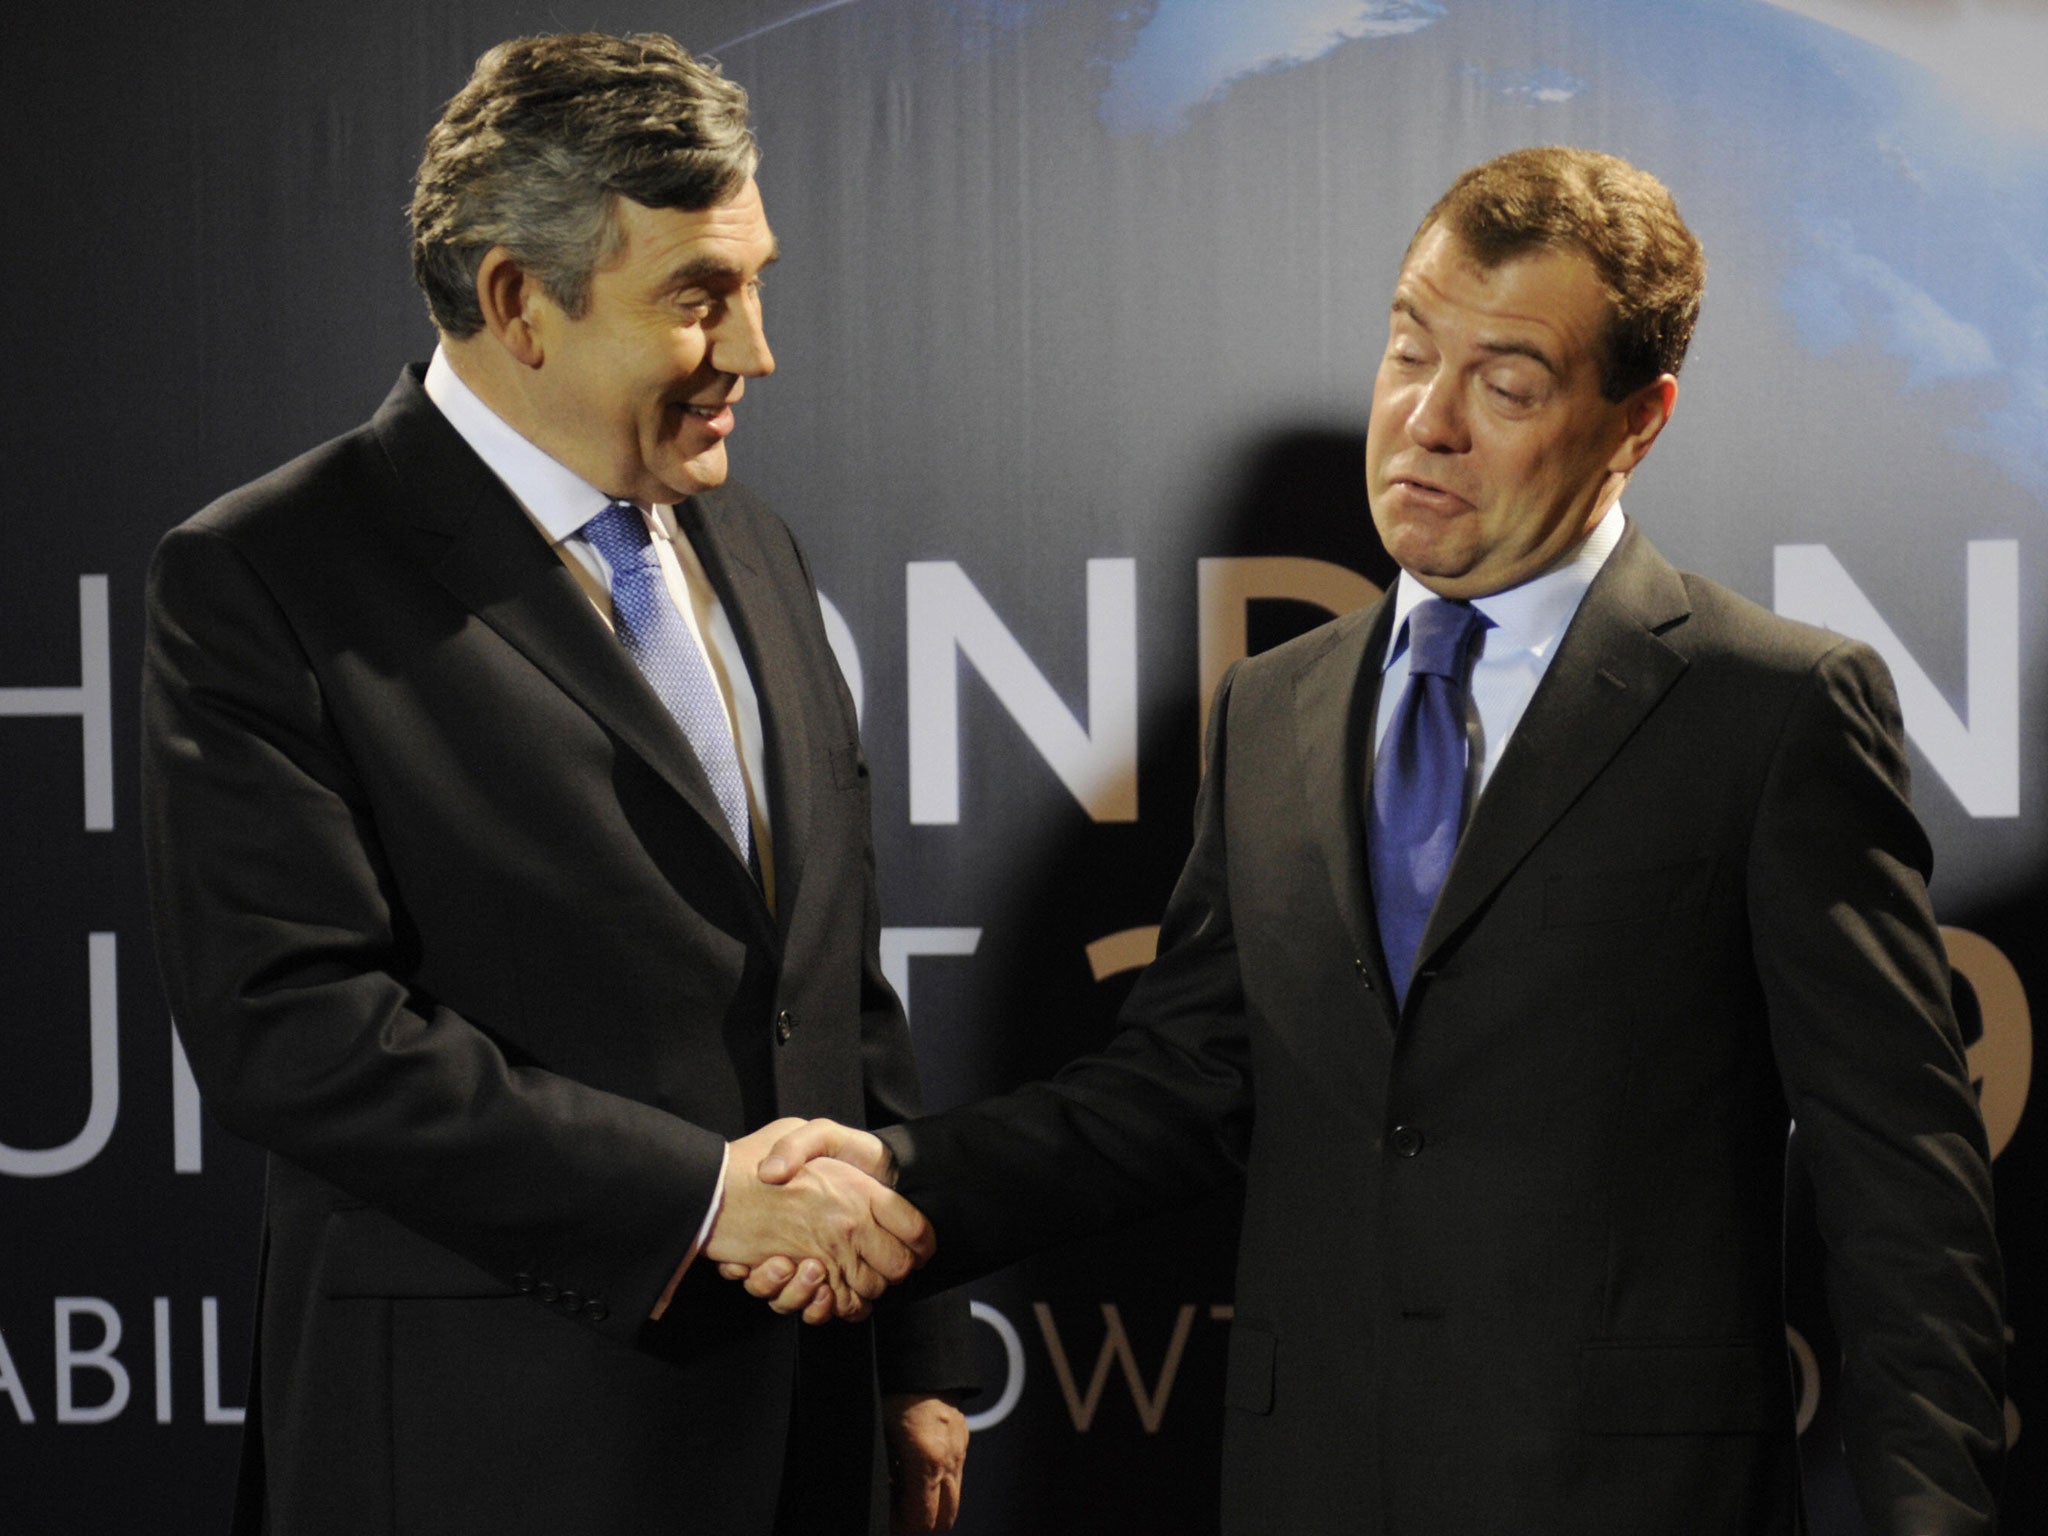 Gordon Brown with the then Russian President Dmitry Medvedev at the G20 summit in London in April 2009